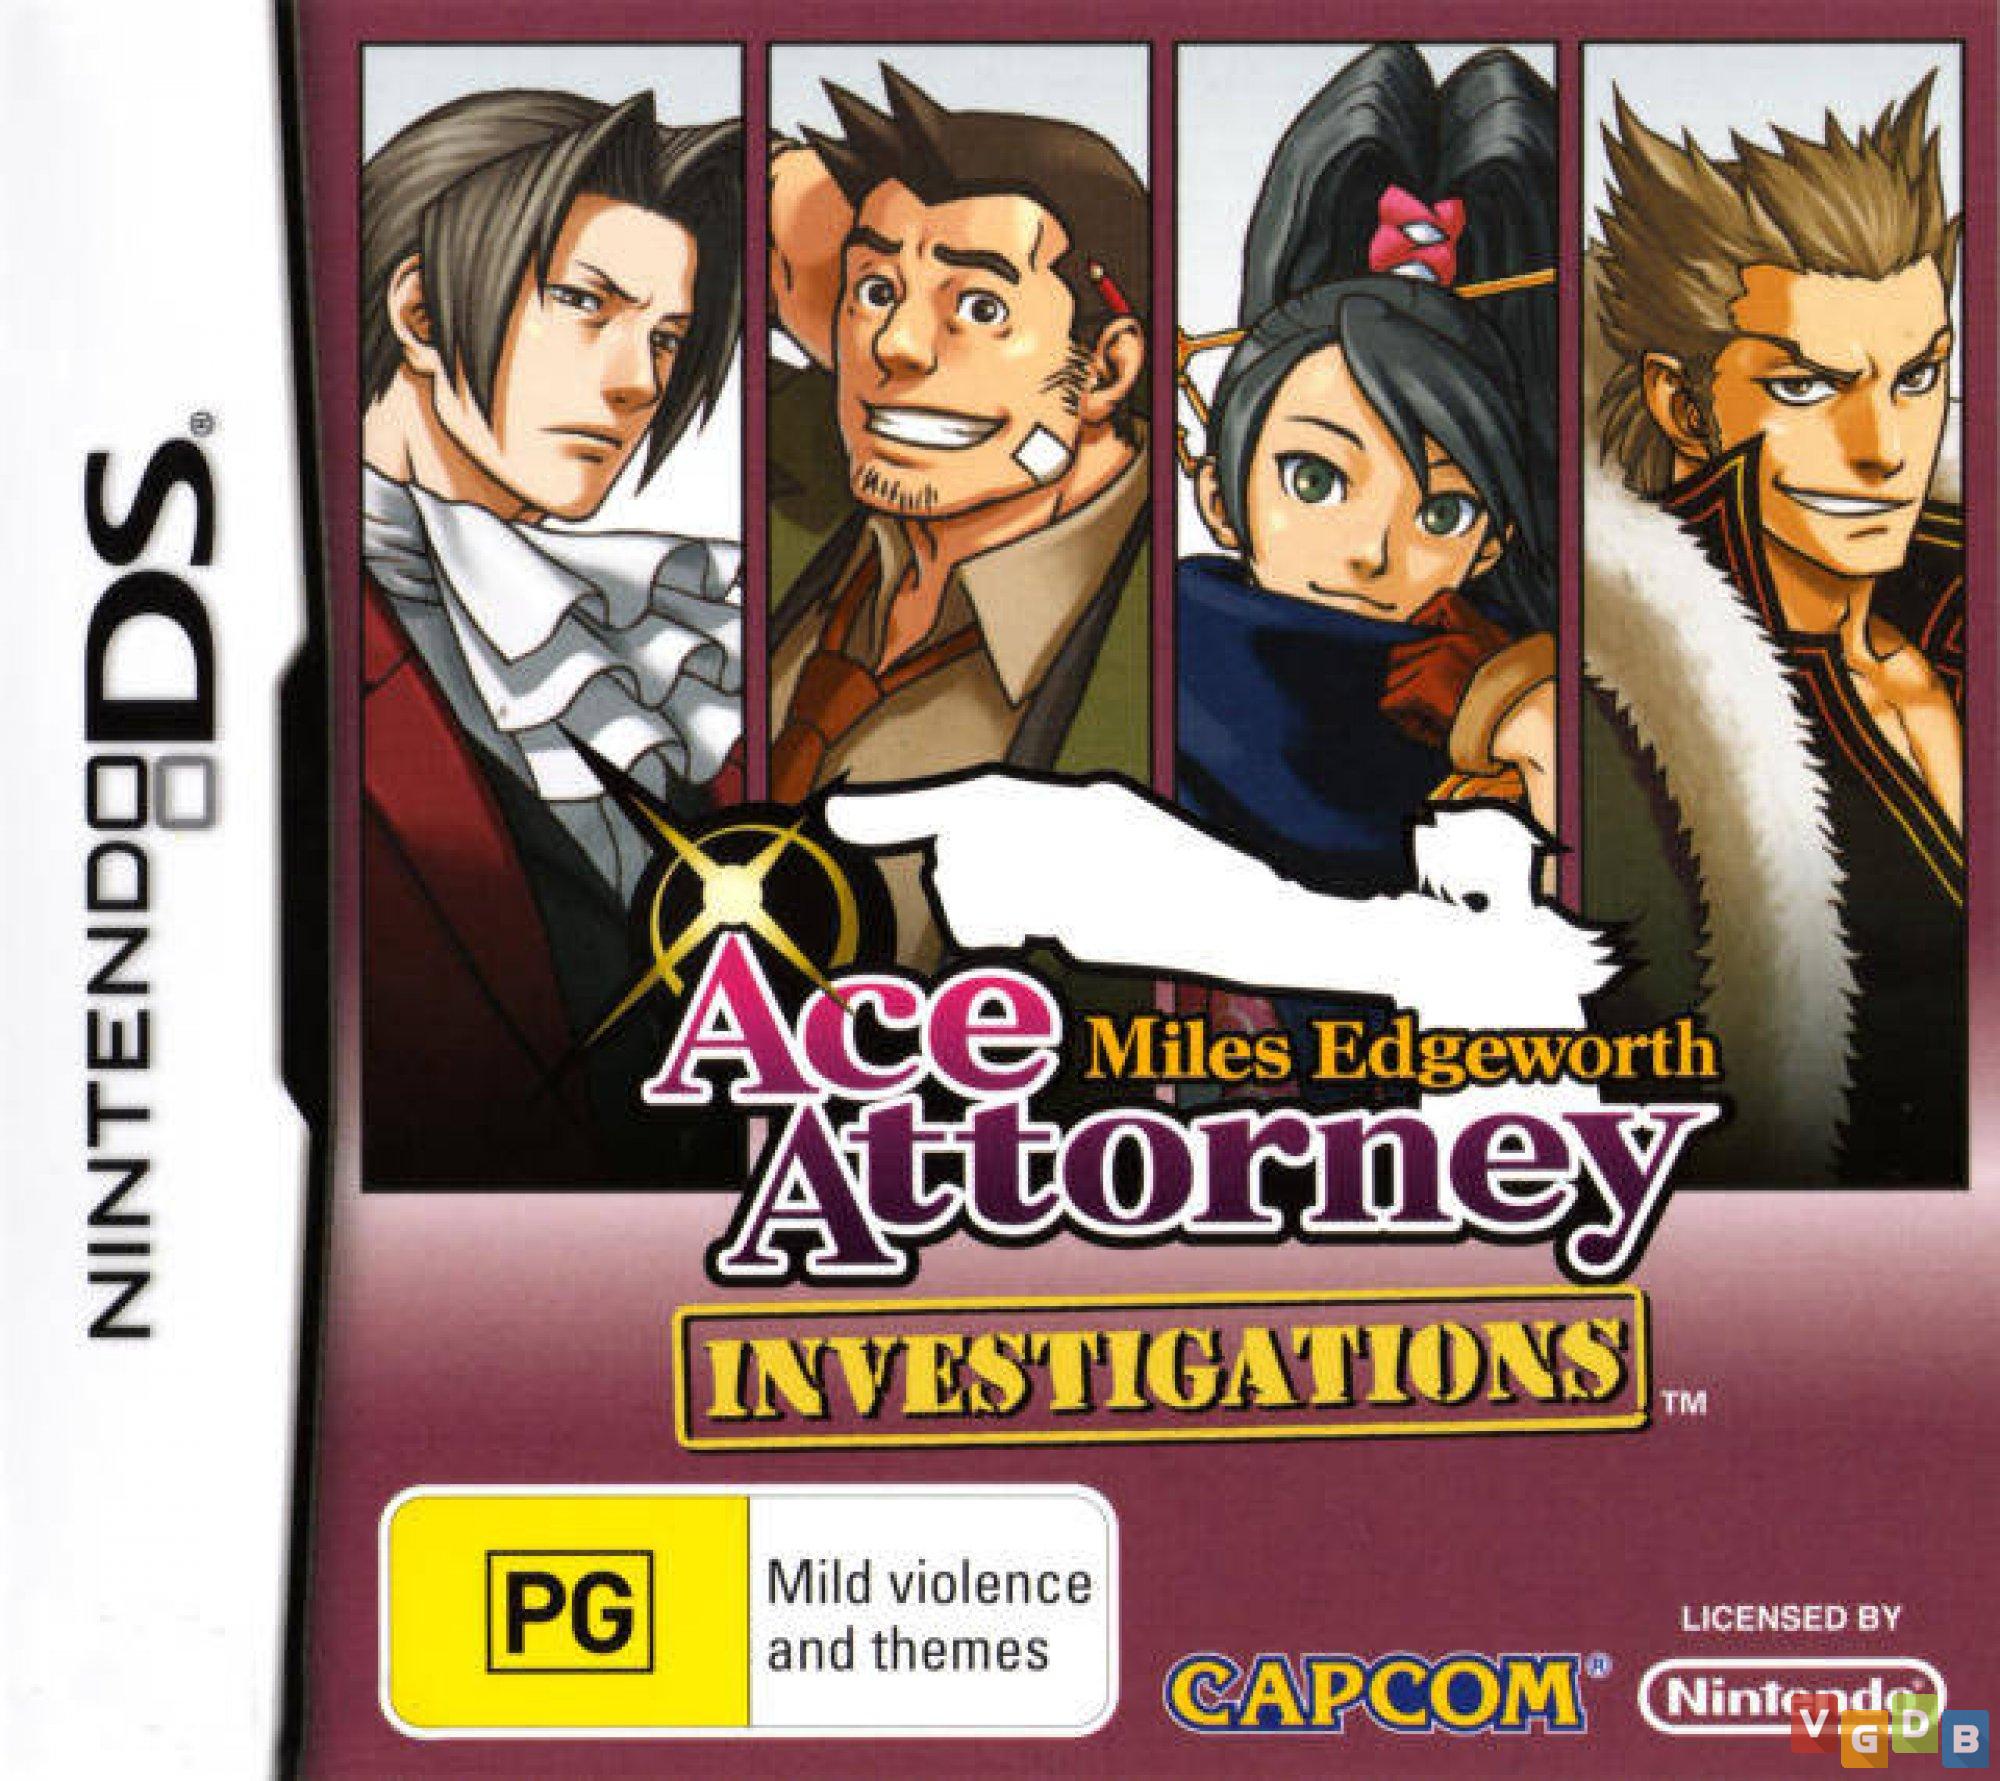 Ace attorney miles edgeworth. Ace attorney investigations: Miles Edgeworth. Miles Edgeworth investigations 2. Ace attorney Nintendo DS. Ace attorney investigations 2 poster.